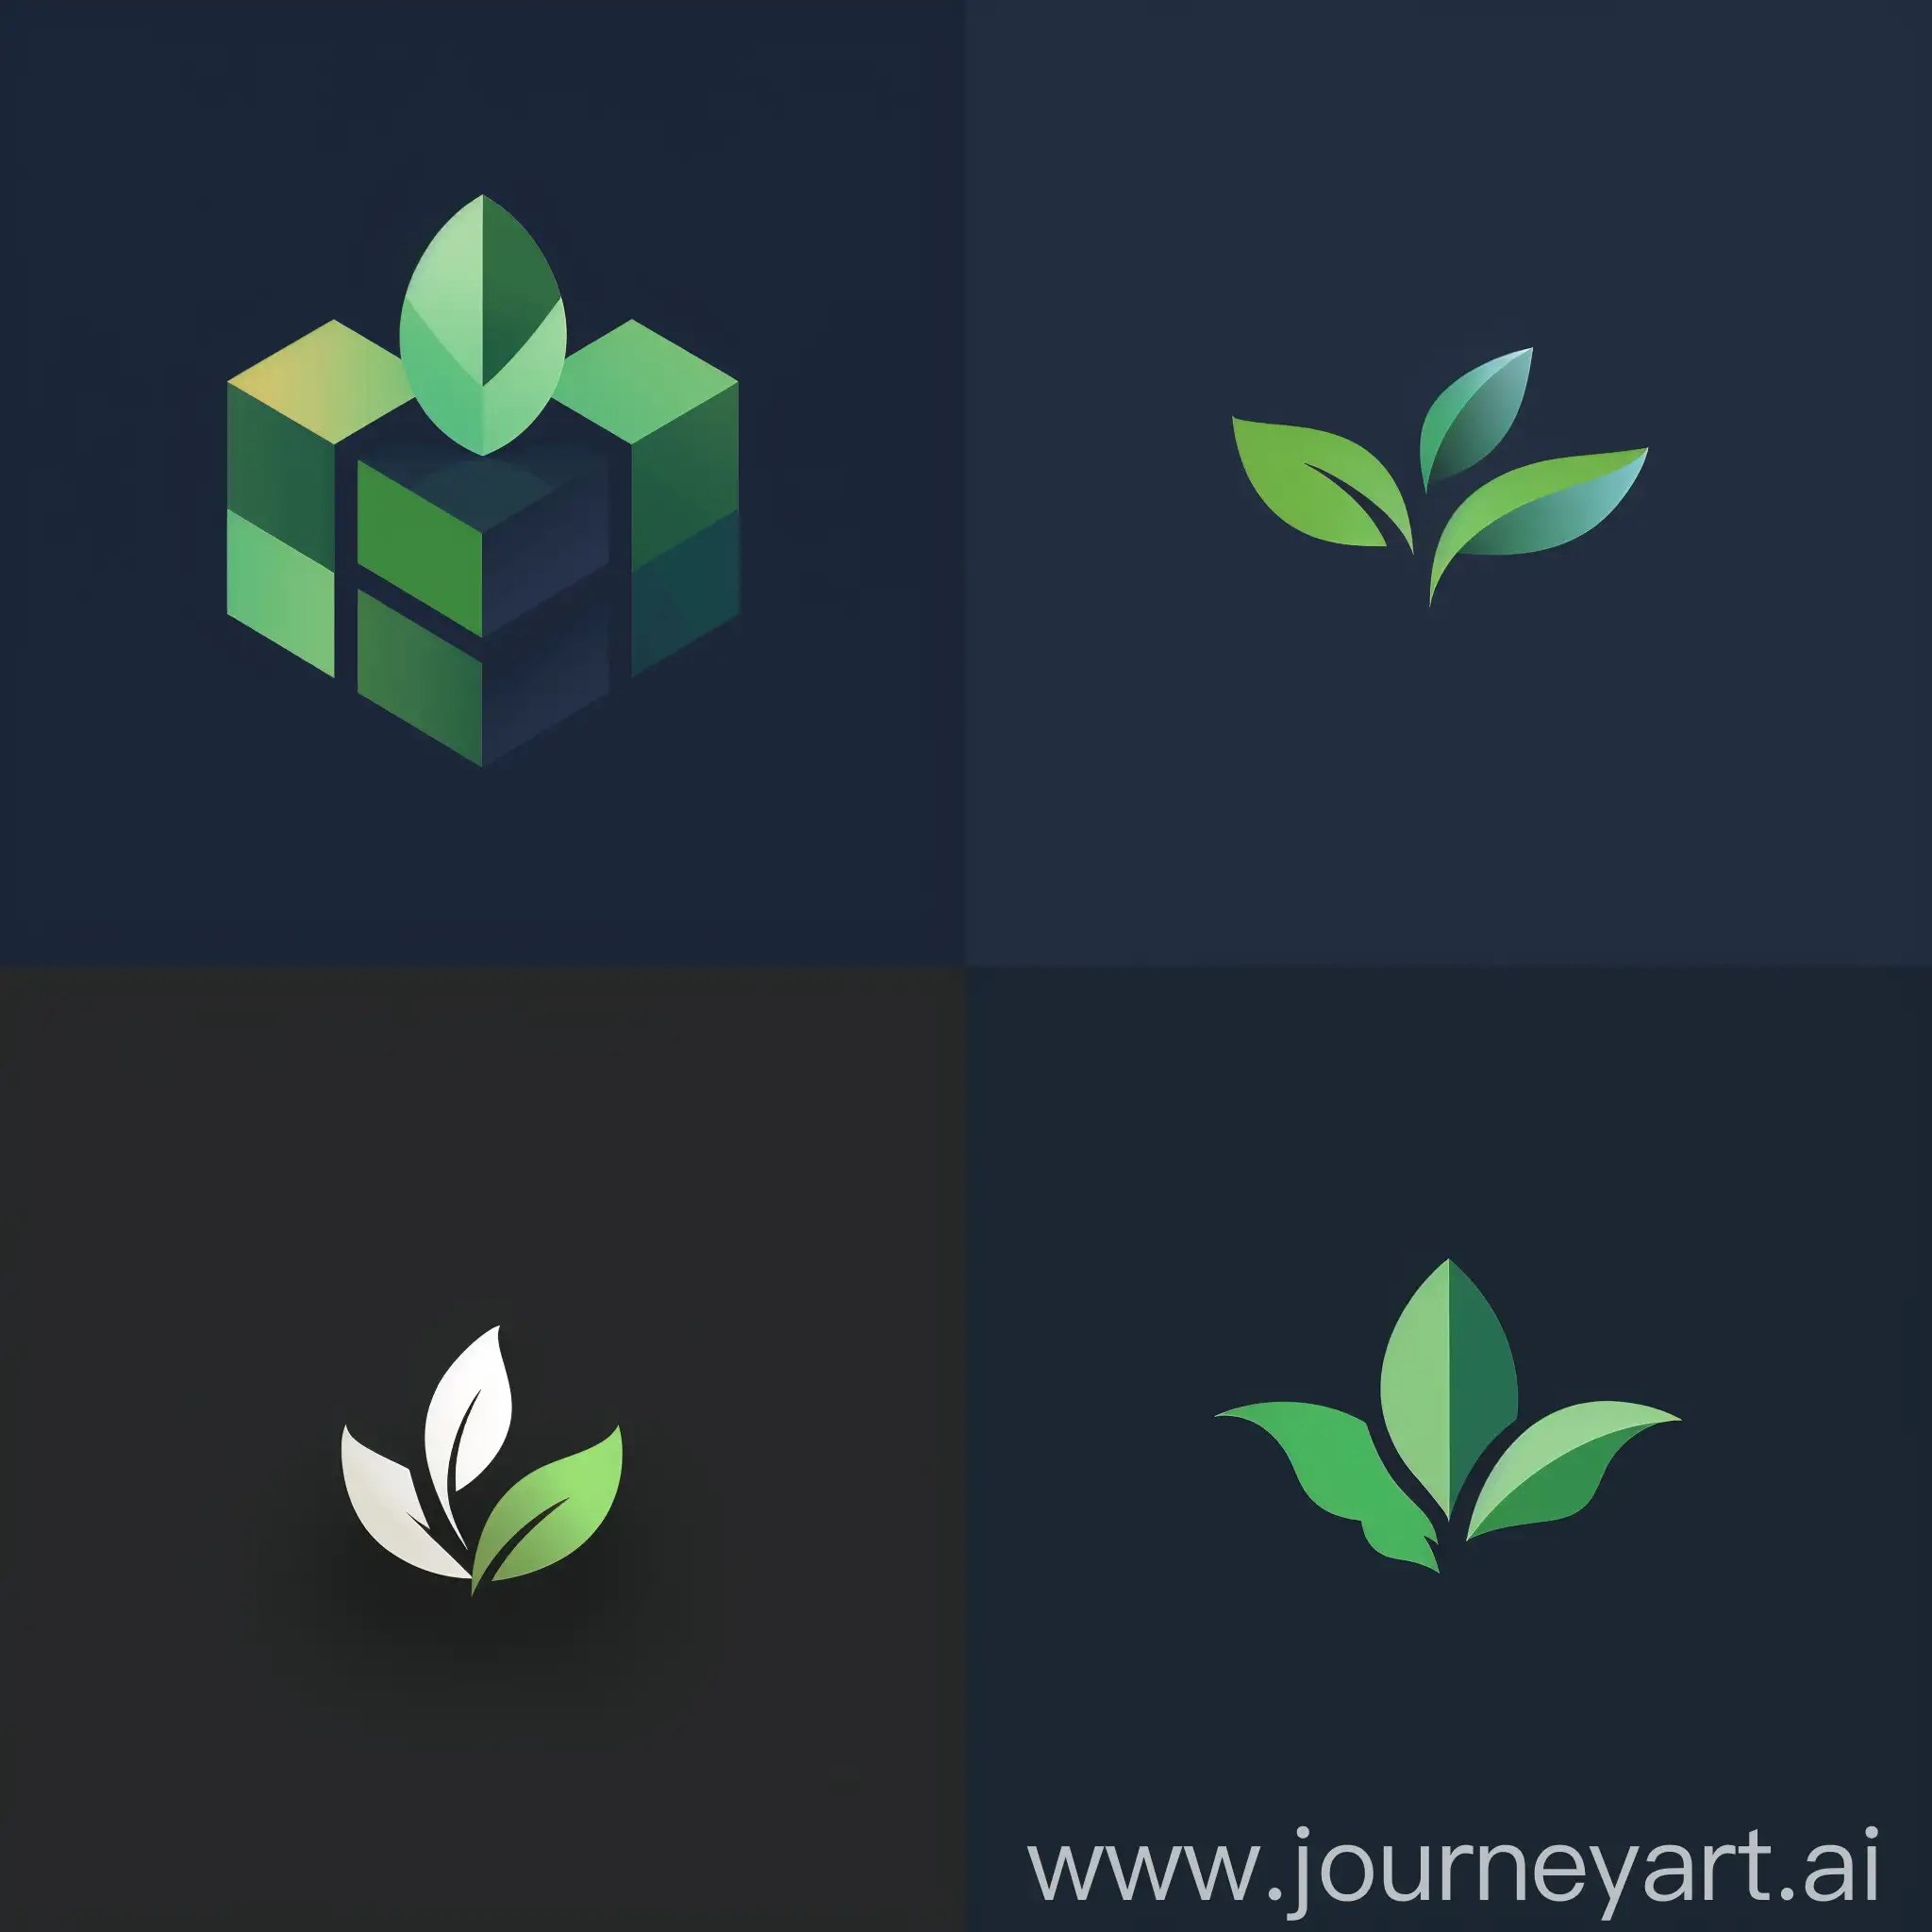 minimalist and sleak company logo for a technology company focused on environmental consercation